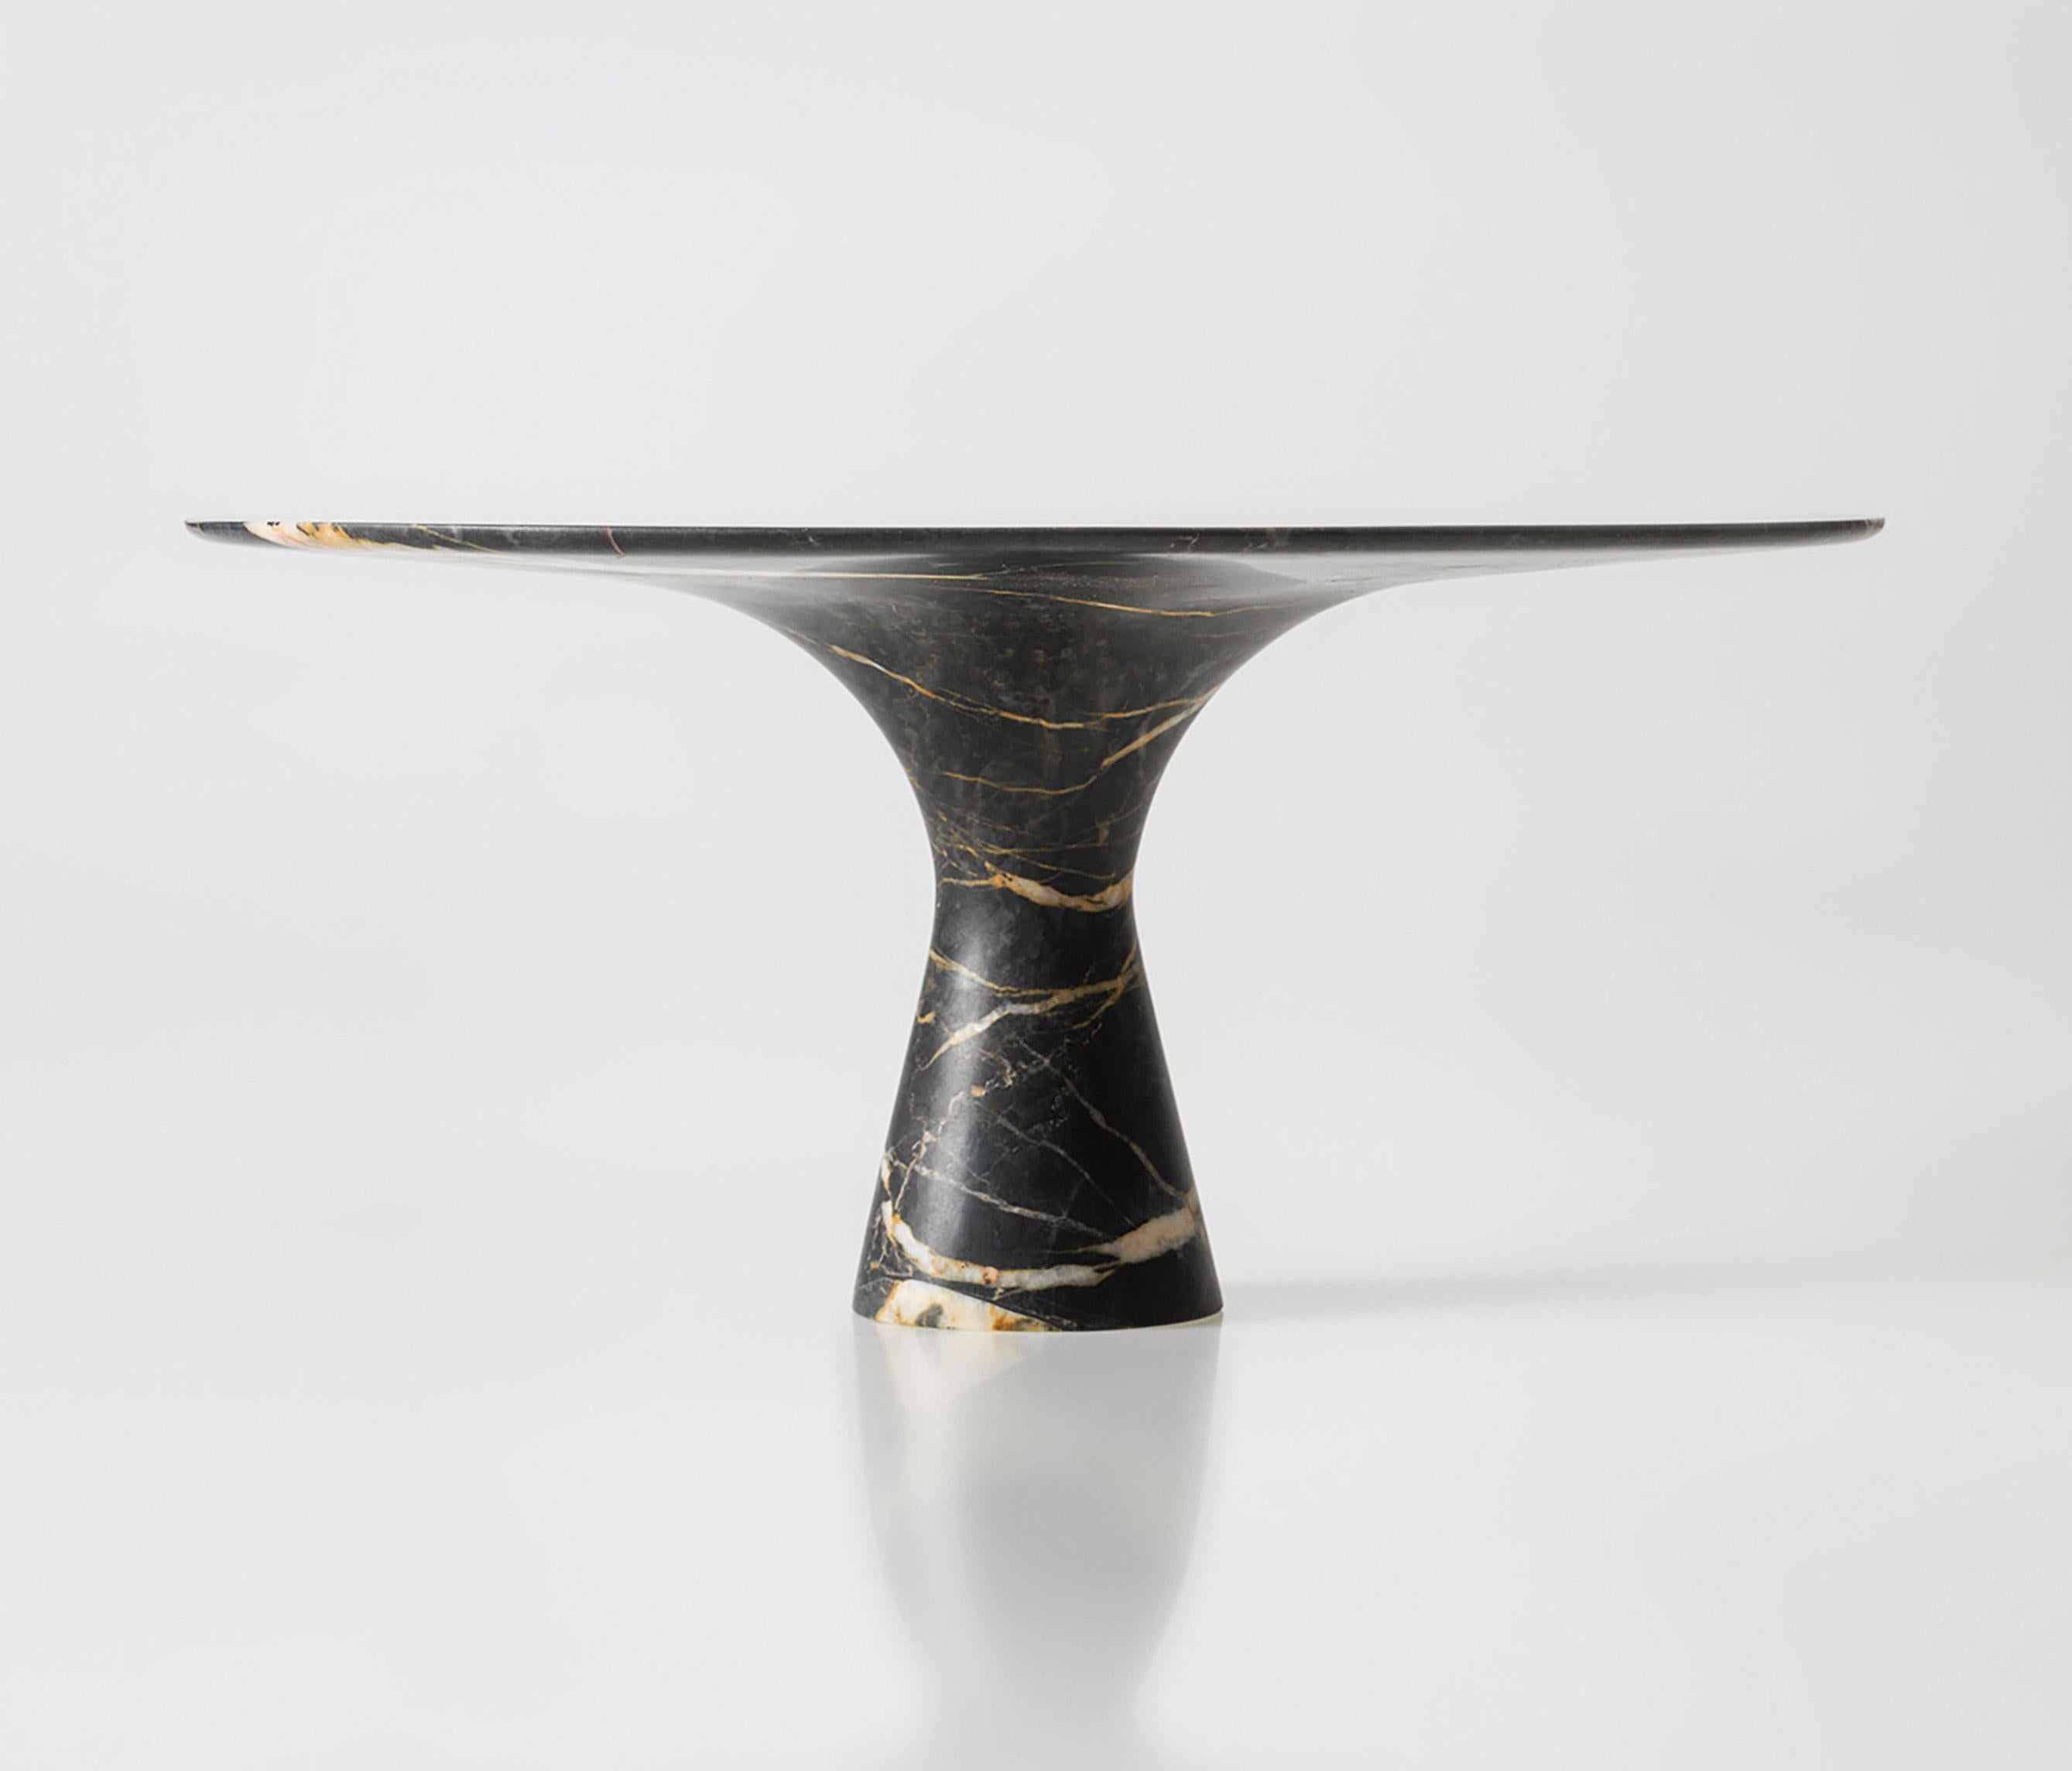 Port Saint Laurent Refined Contemporary Marble Dining Table 180/75
Dimensions: 180 x 75 cm
Materials: Port Saint Laurent

Angelo is the essence of a round table in natural stone, a sculptural shape in robust material with elegant lines and refined